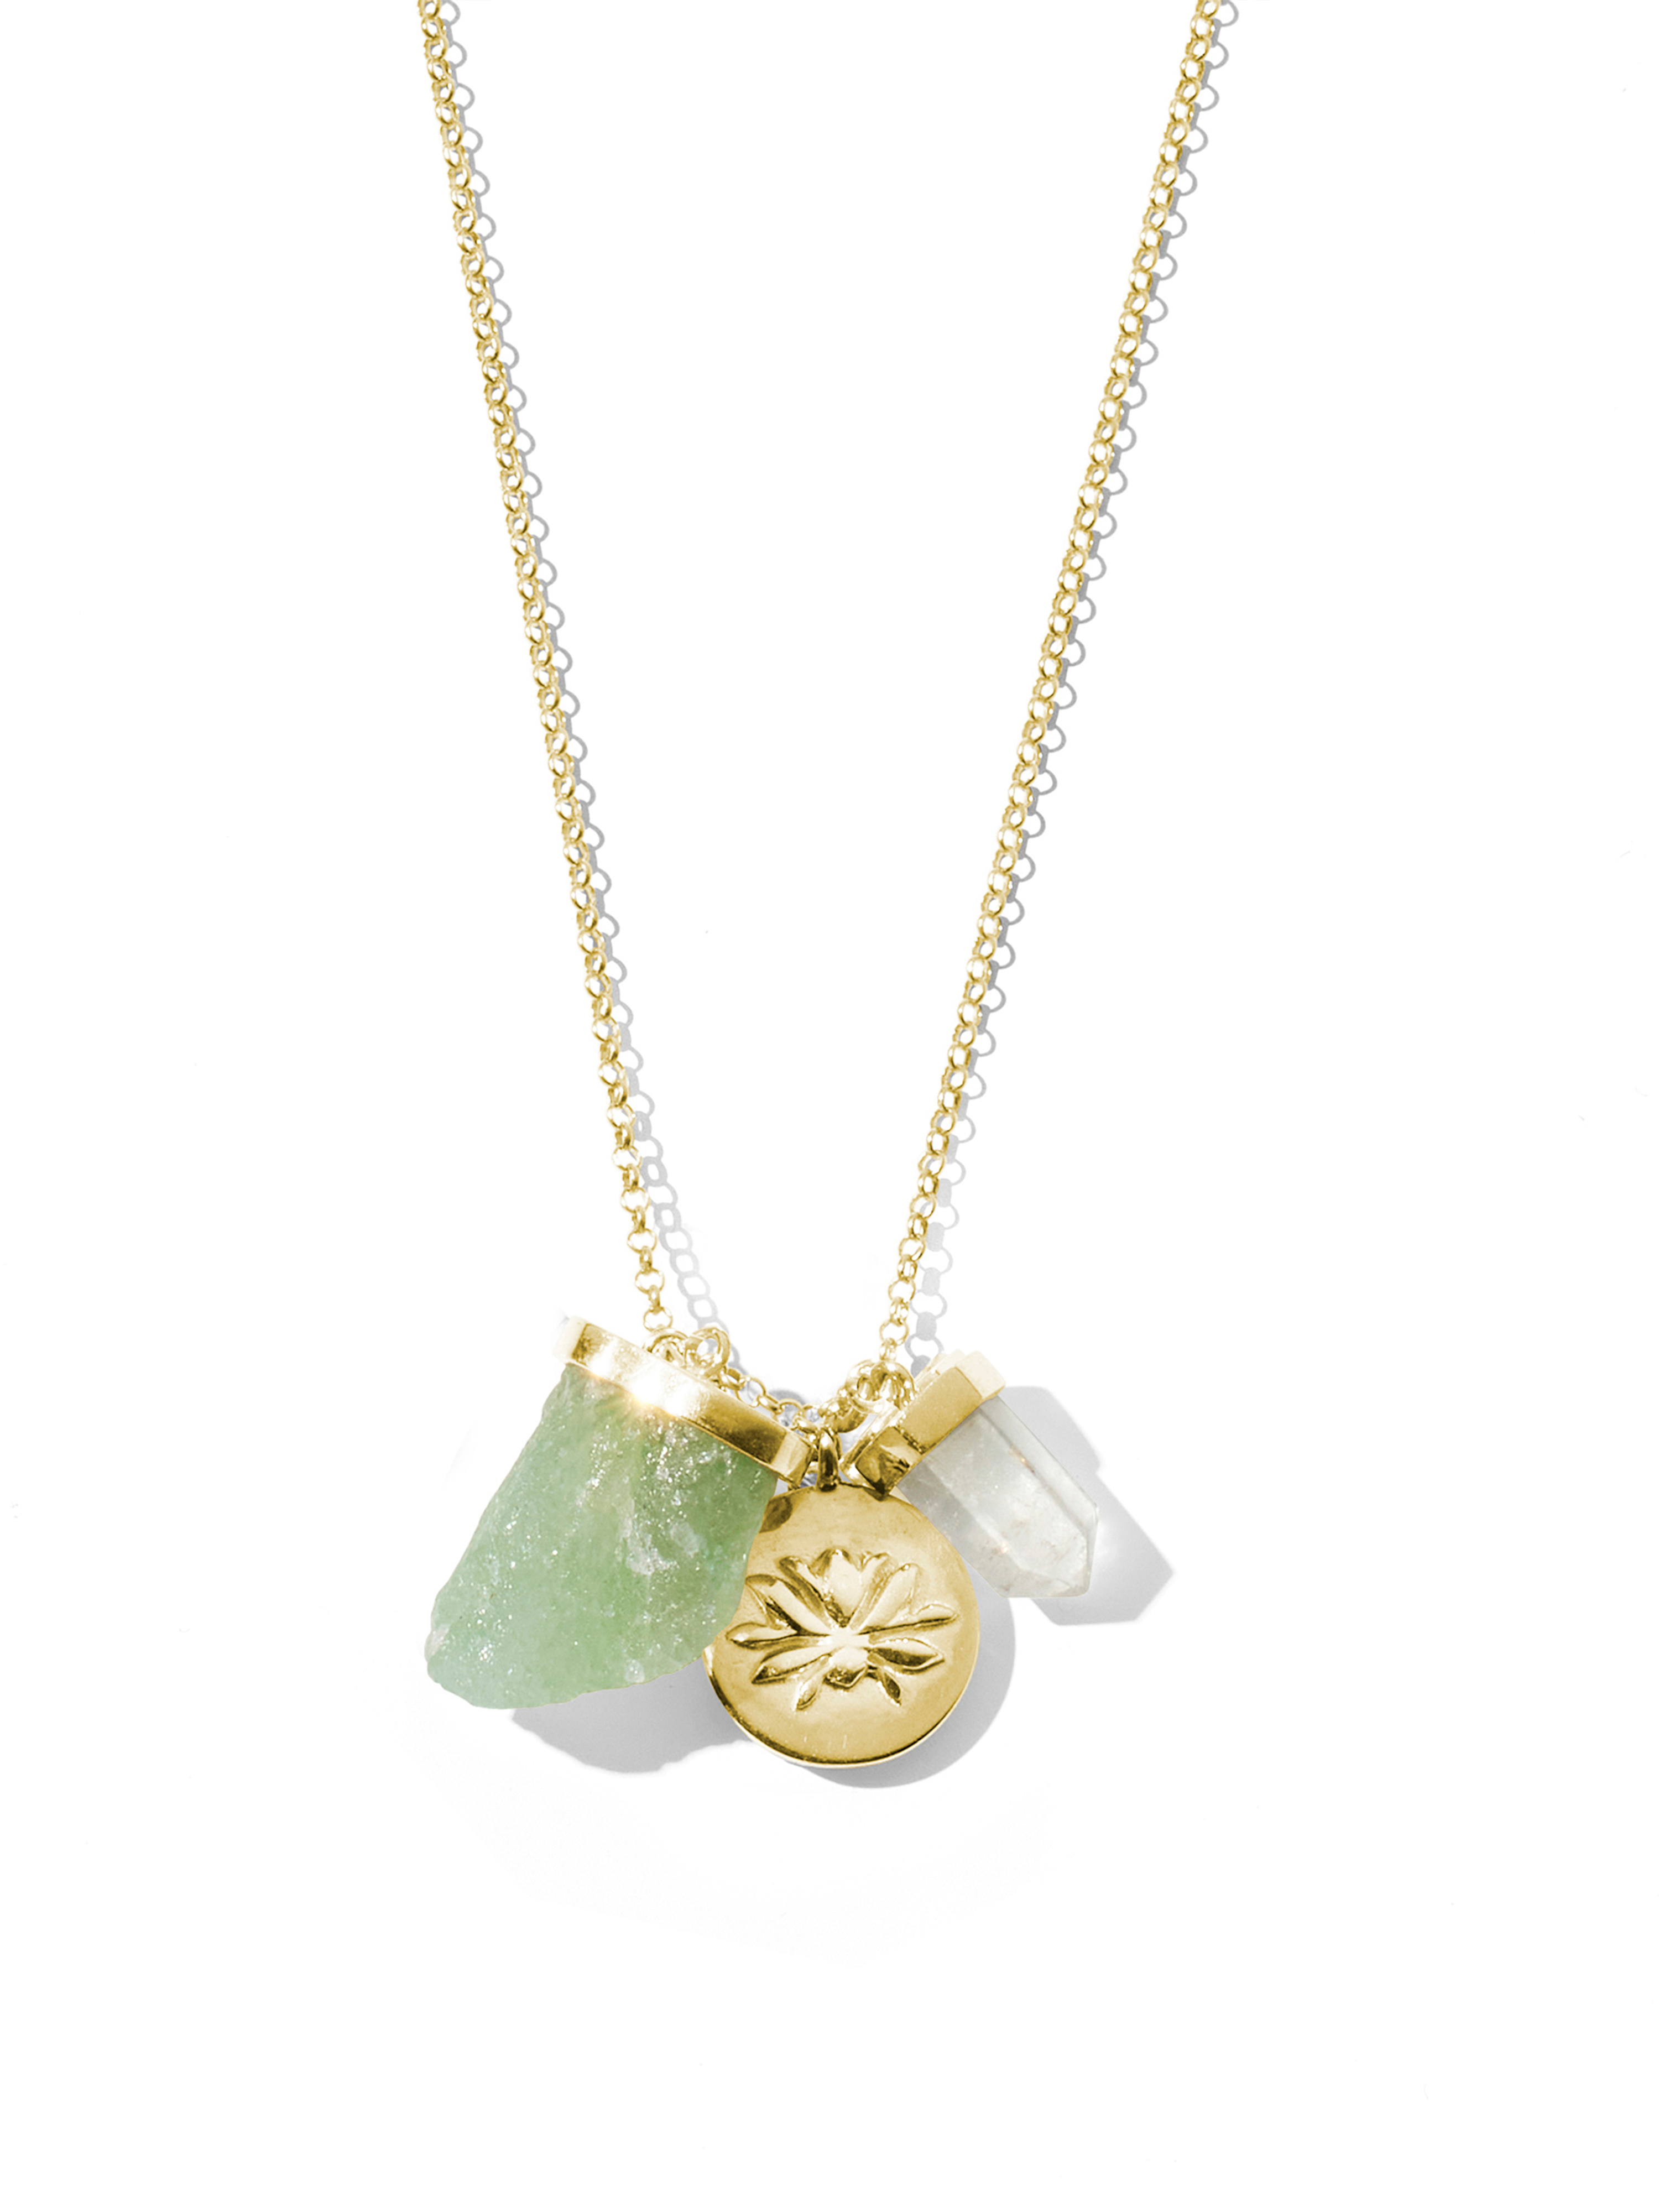 the lucky necklace | green aventurine, clear quartz + lotus